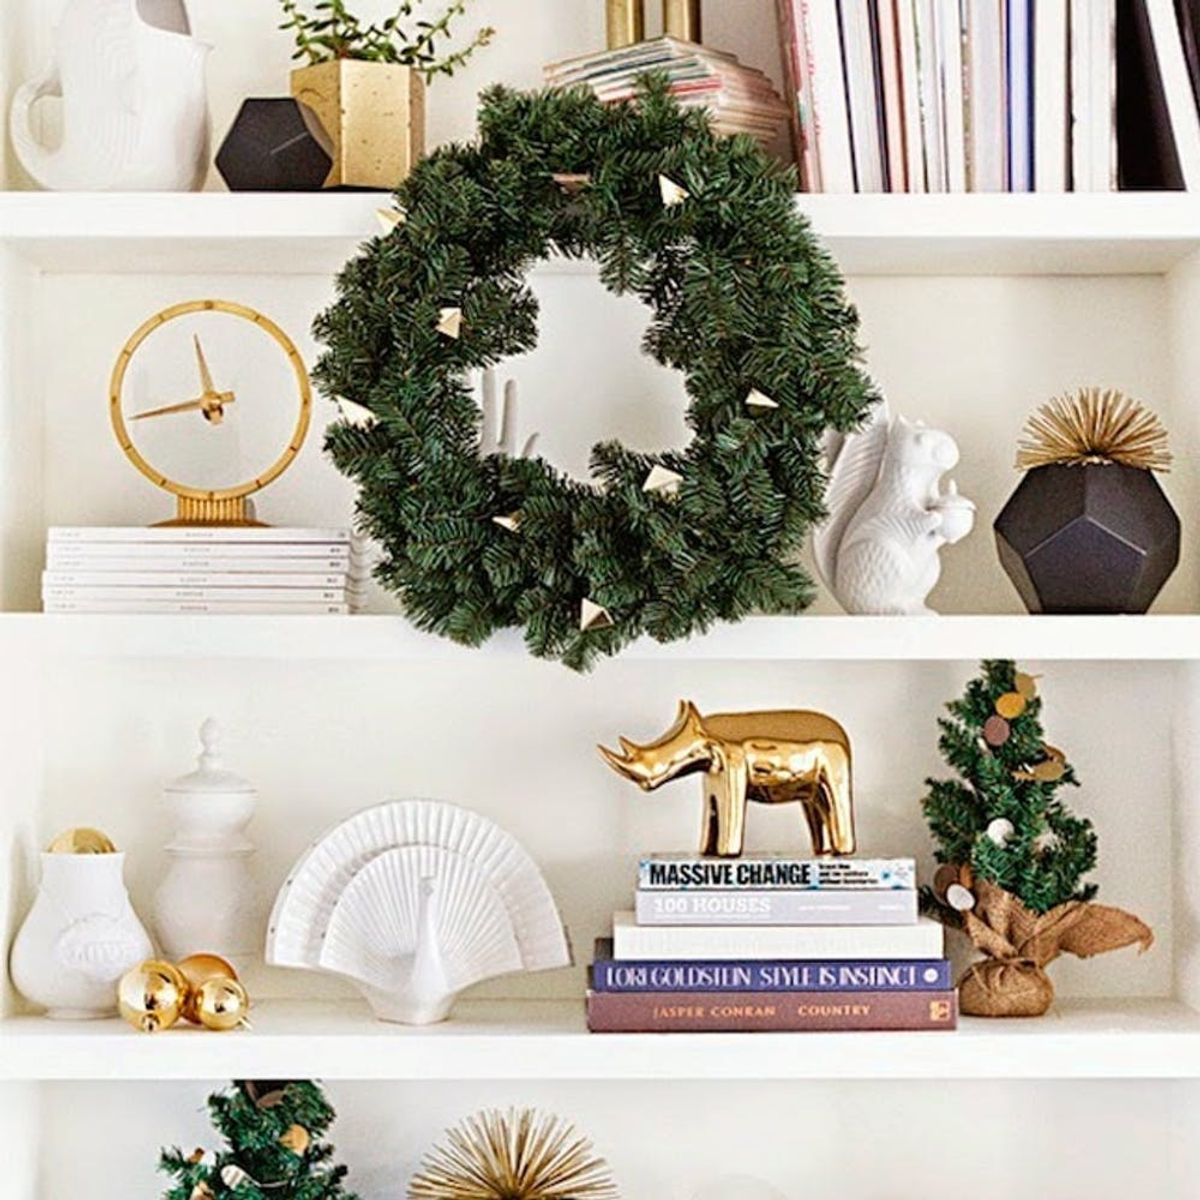 8 Holiday #Shelfies You’ll Want to Recreate